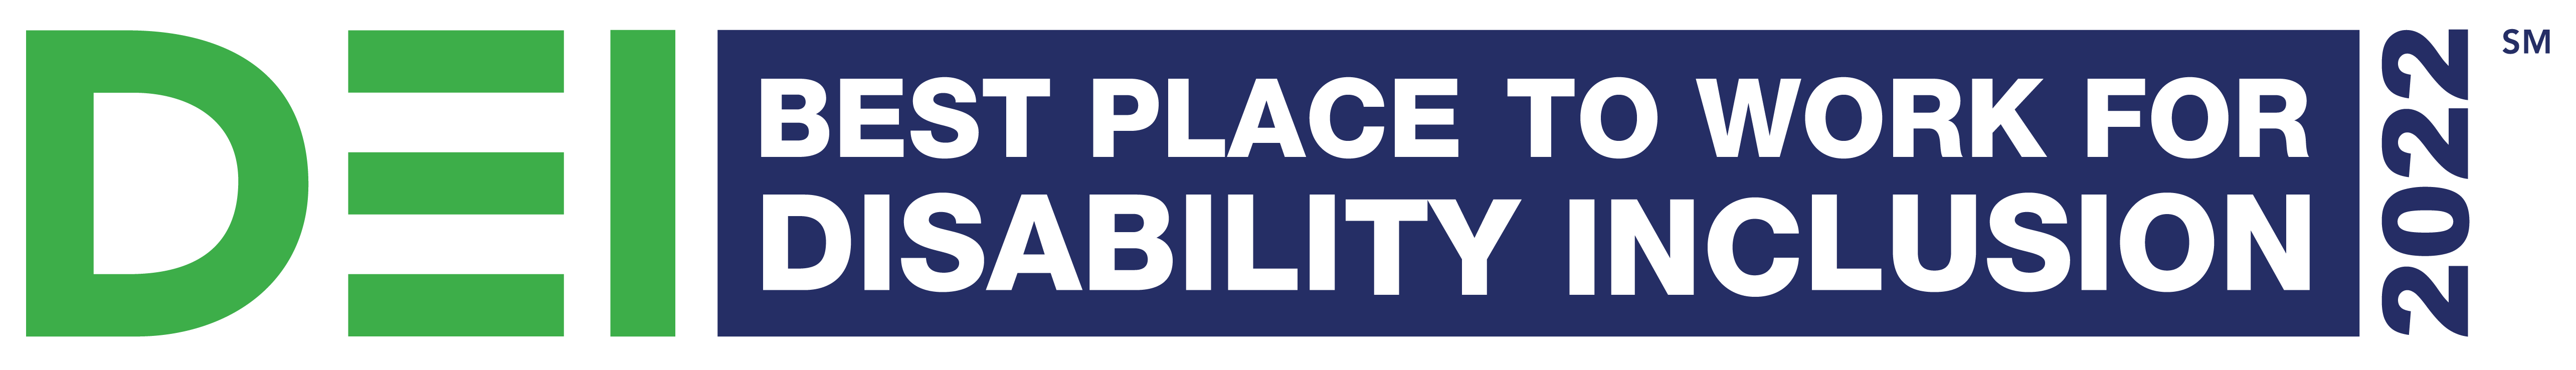 CCA has been named a Best Place to Work for Disability Inclusion in 2022 by the Disability Equality Index (DEI)